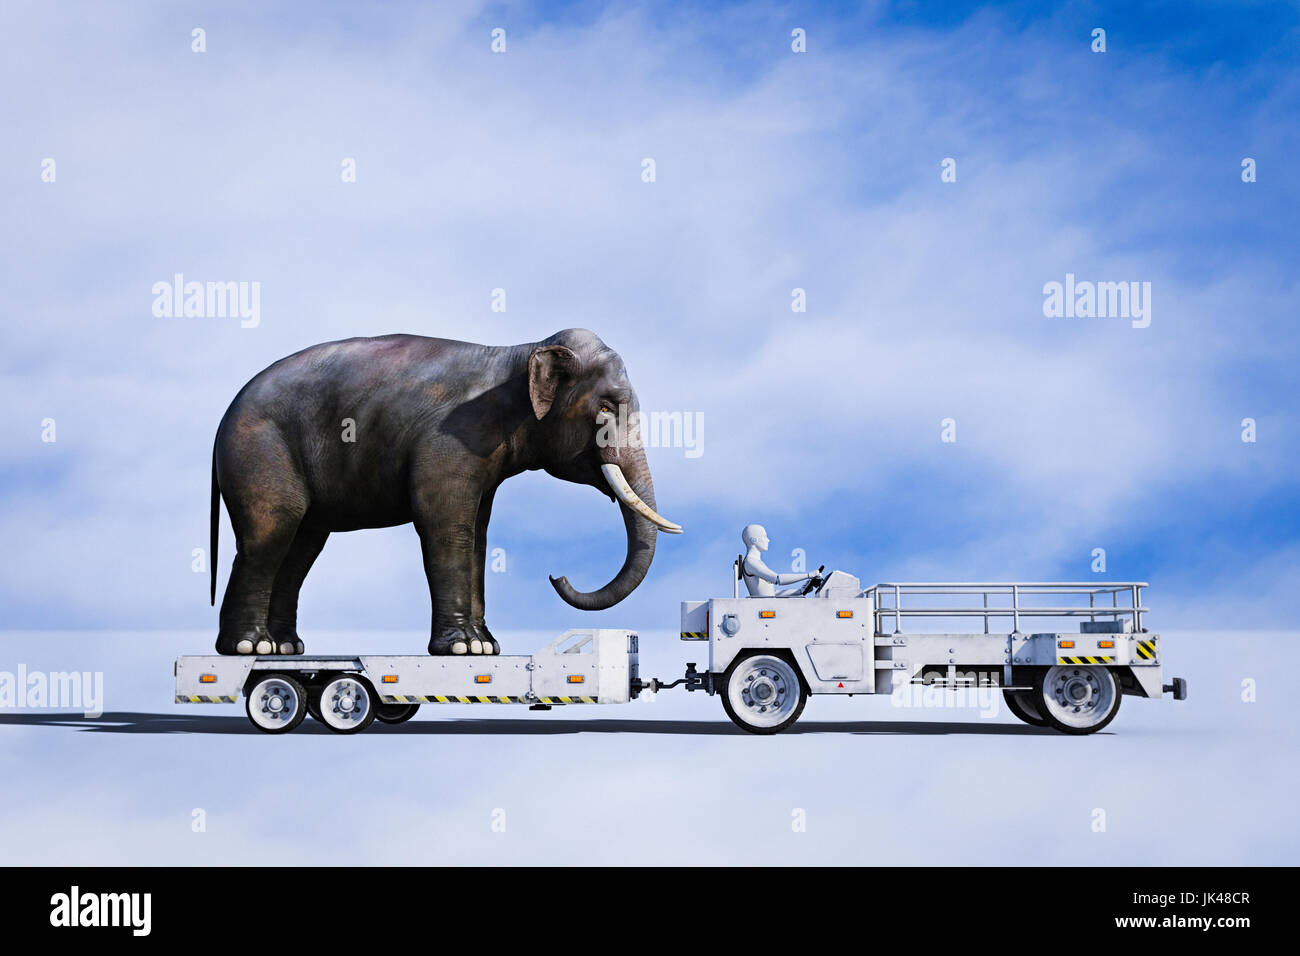 Robot driving tractor pulling elephant on trailer Stock Photo